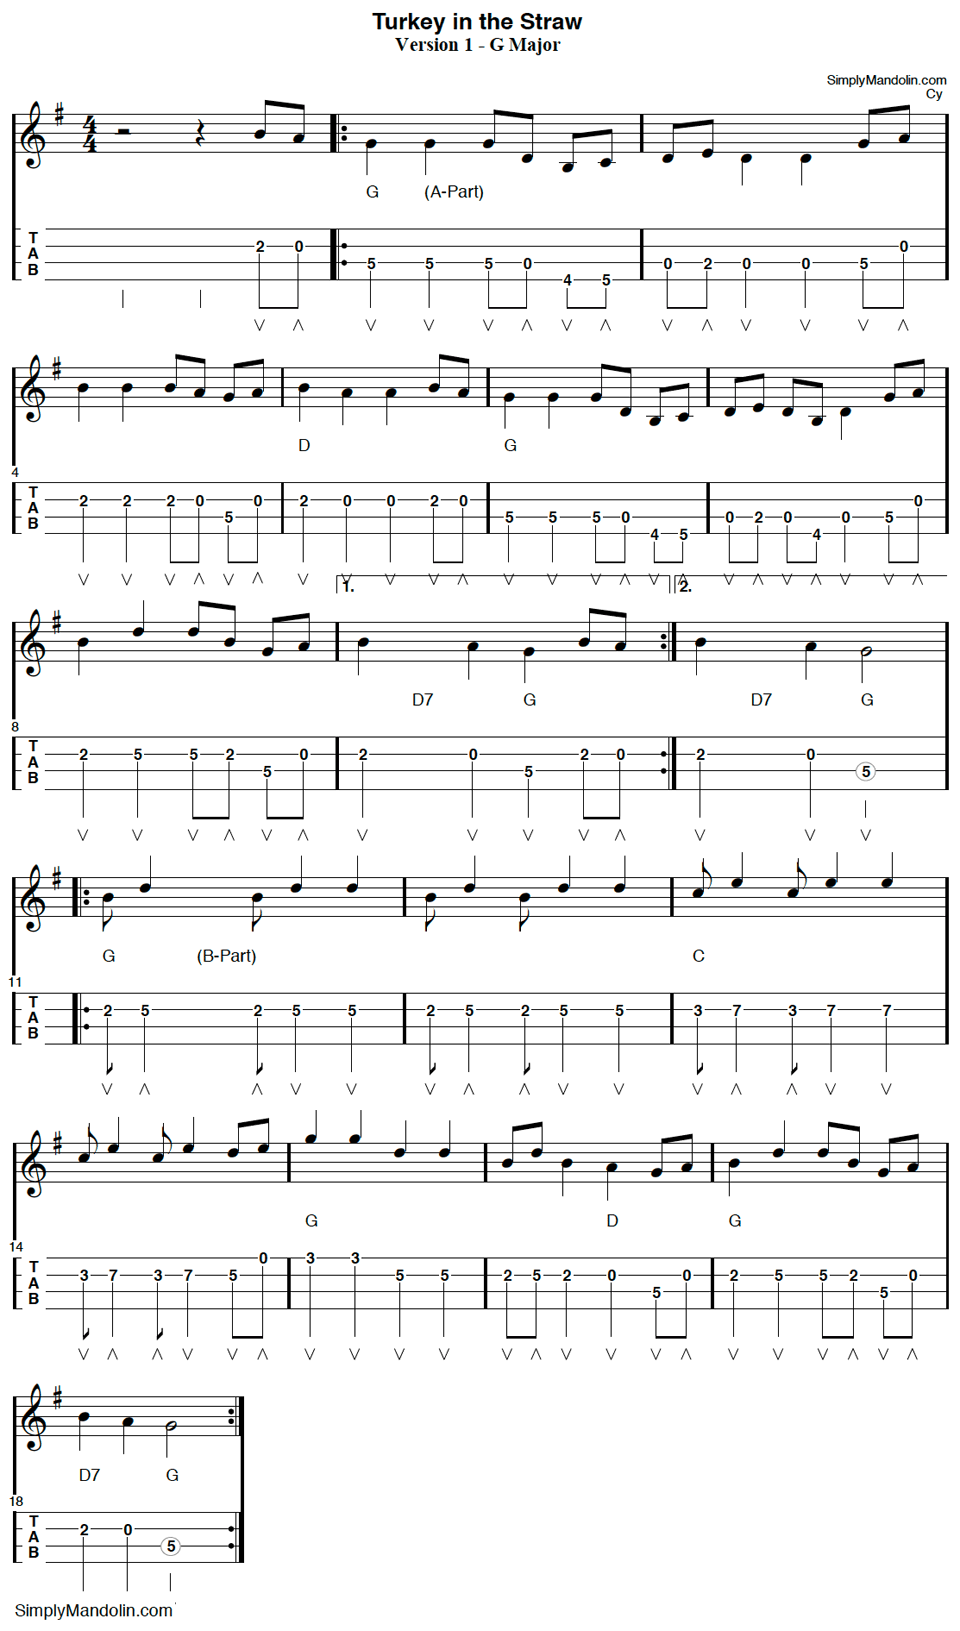 Image of the music and tab sheet for the tune “Turkey in the Straw”,